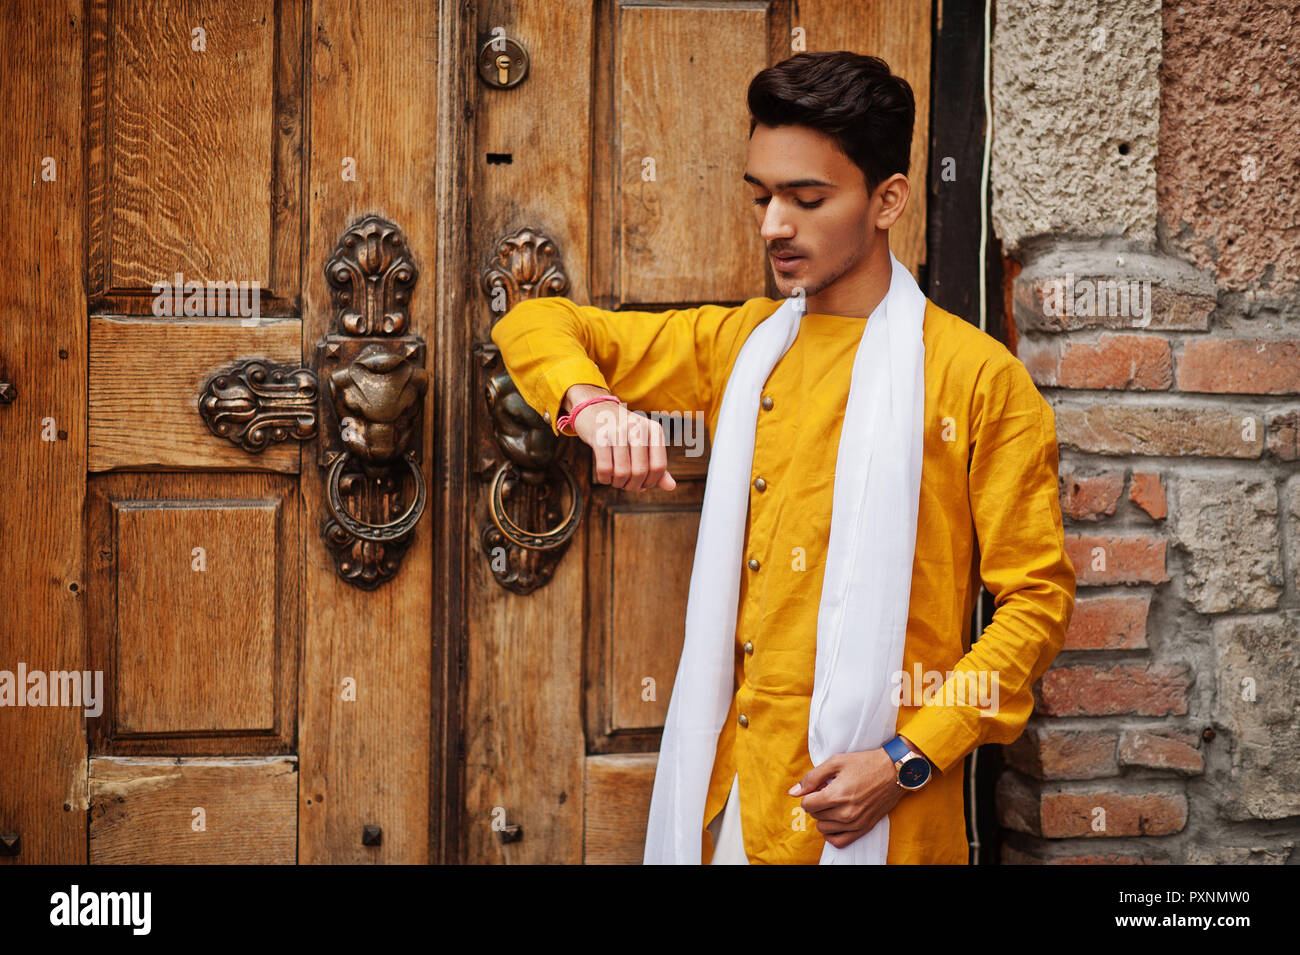 Men's fashion goals ft. Jassie Gill | Times of India